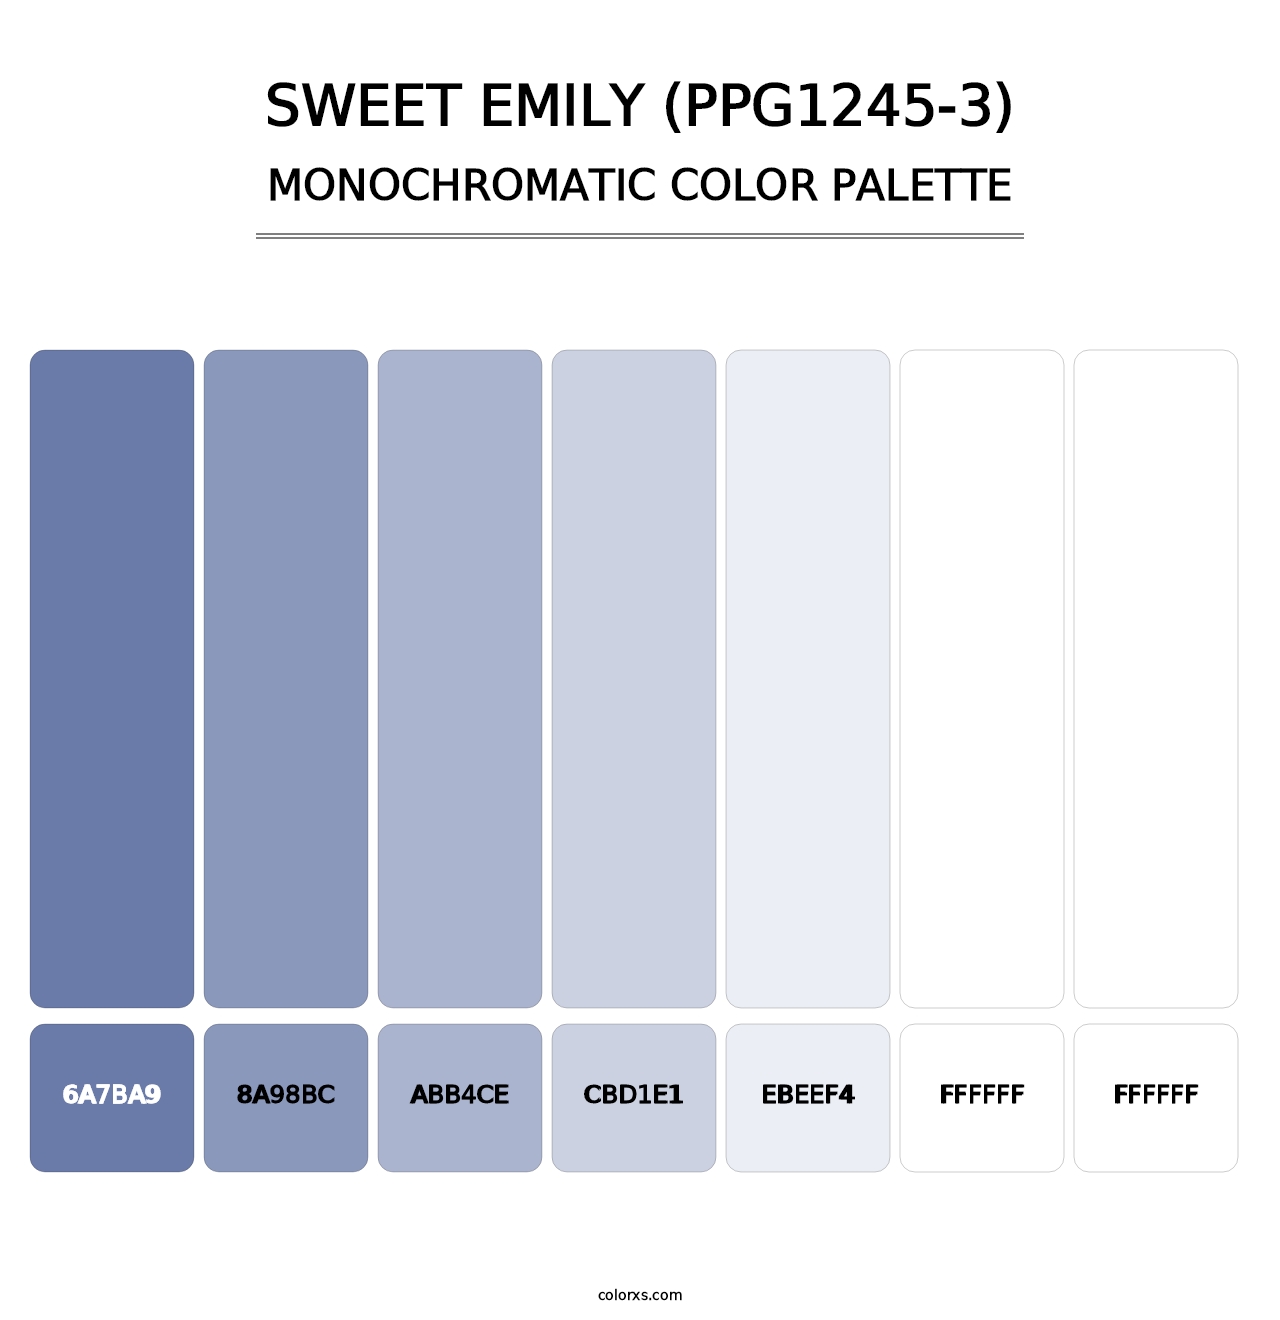 Sweet Emily (PPG1245-3) - Monochromatic Color Palette